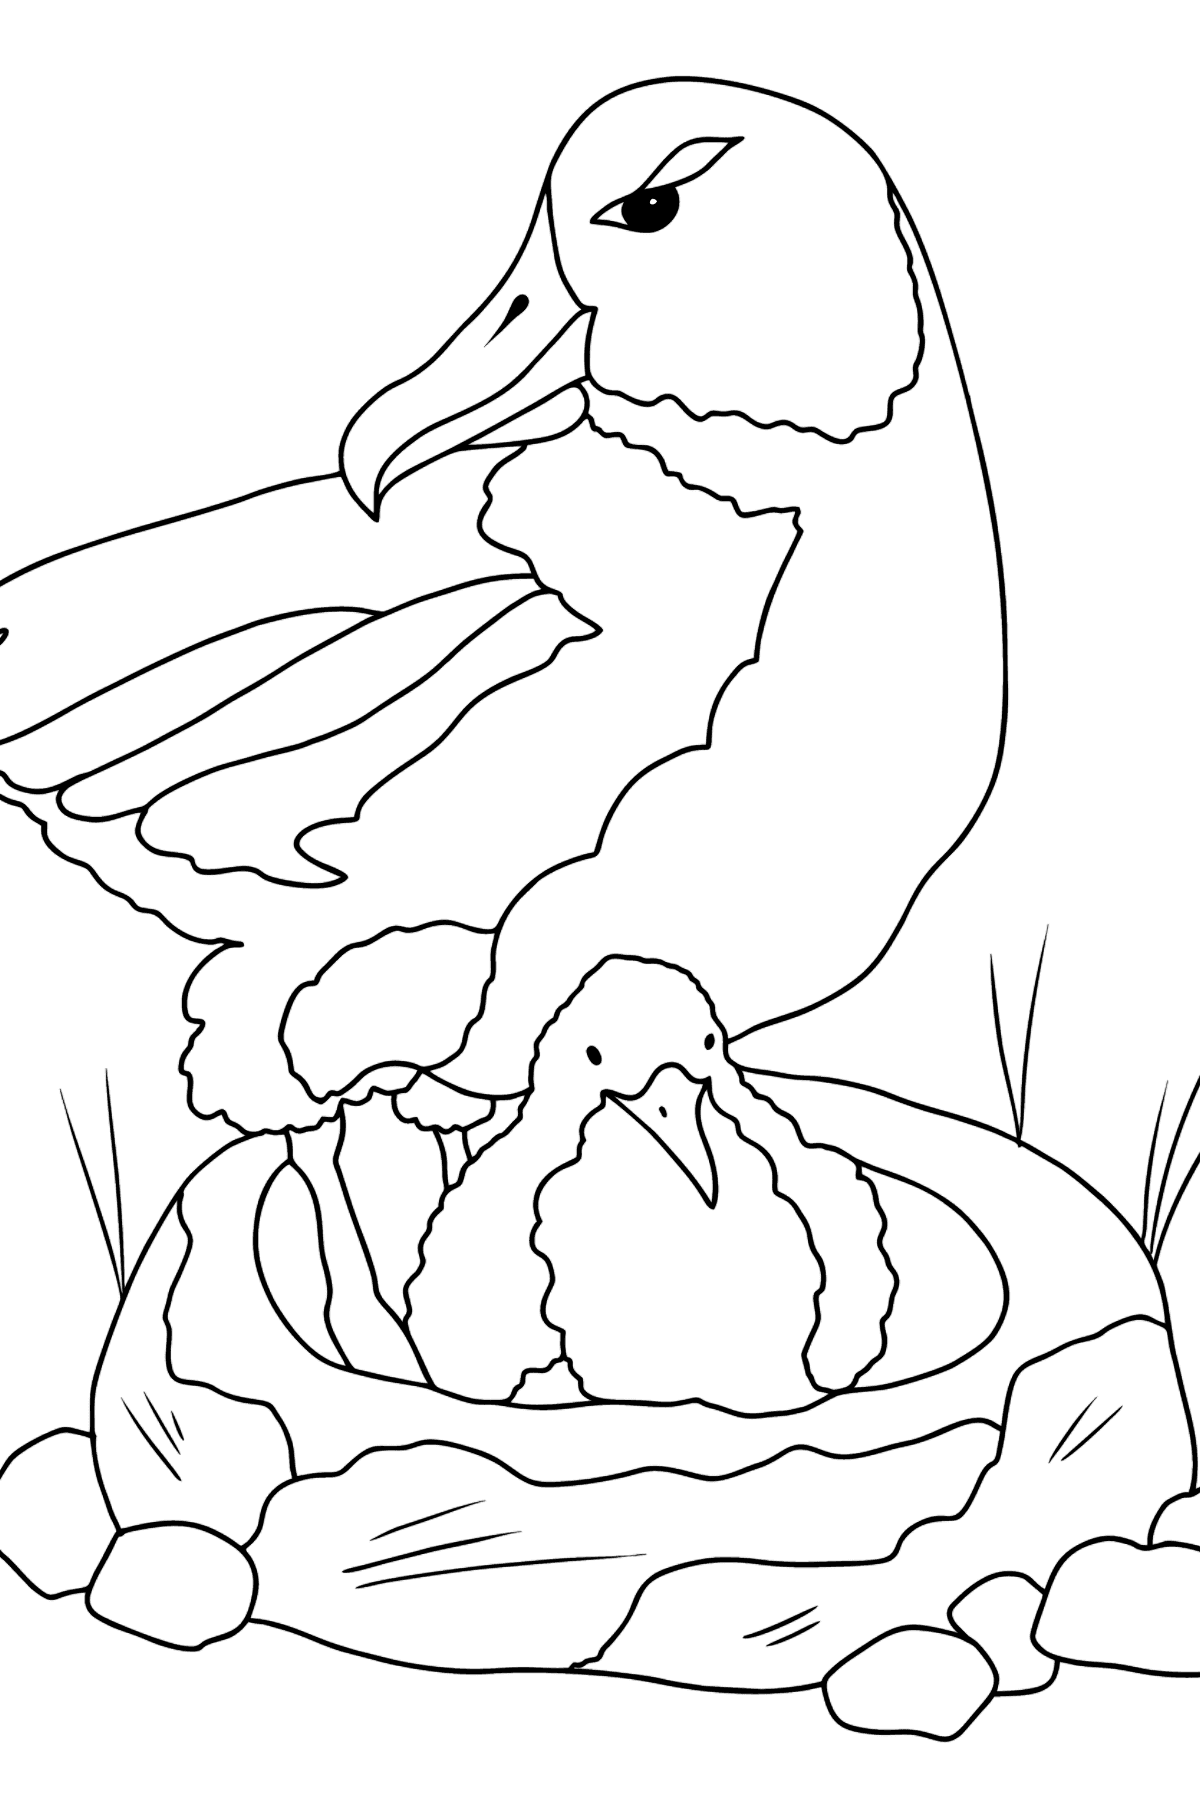 Coloring Page An Albatross   Download and Color Online